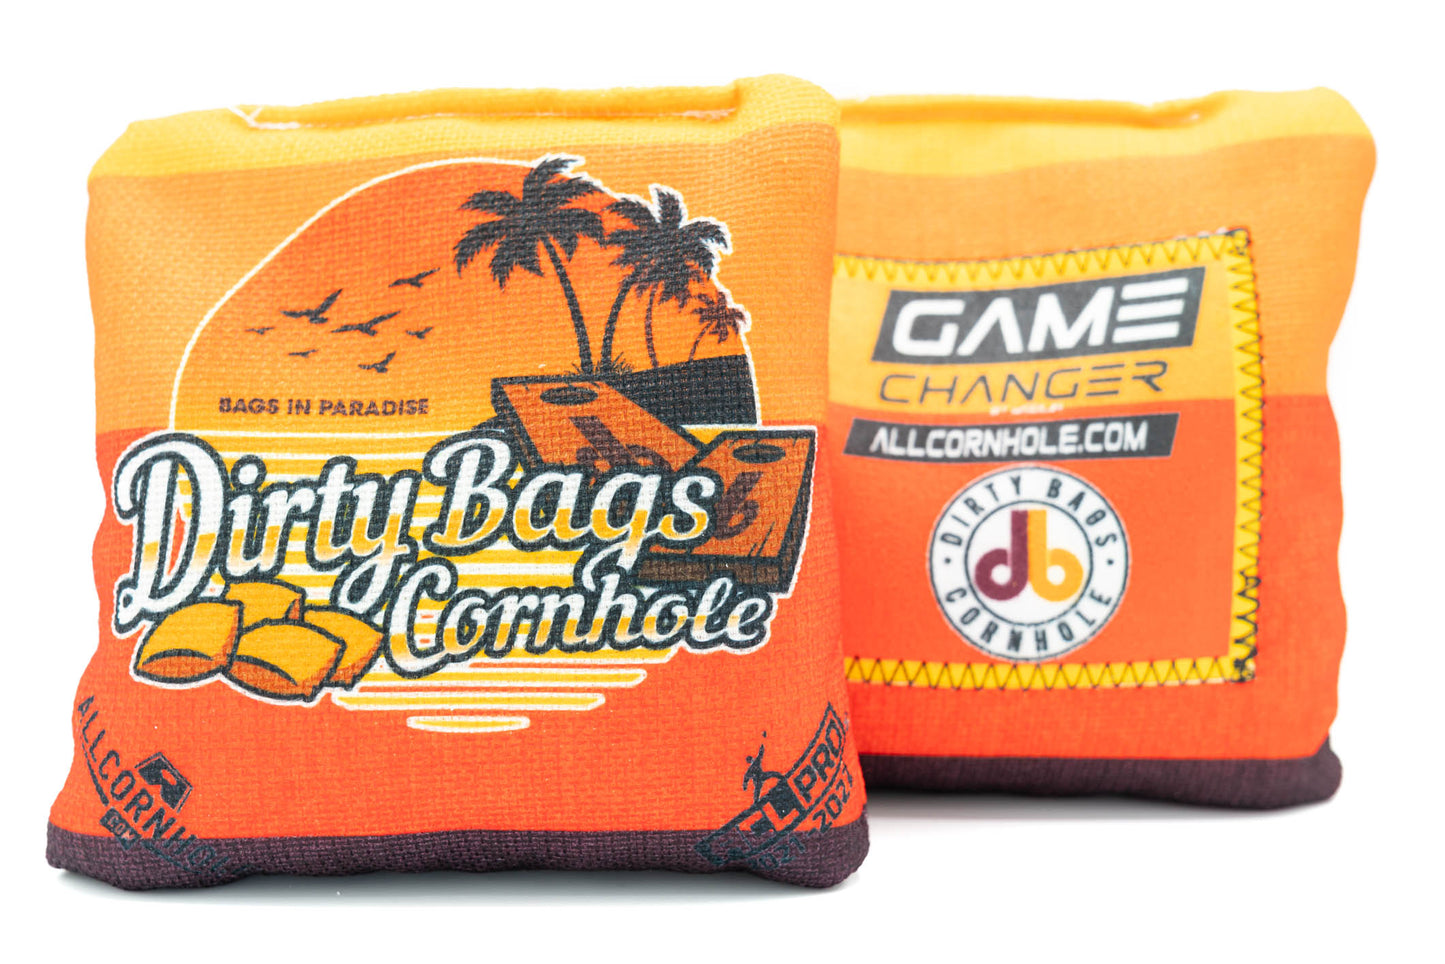 Game Changer Cornhole Bags - Bags In Paradise  (Set of 4)